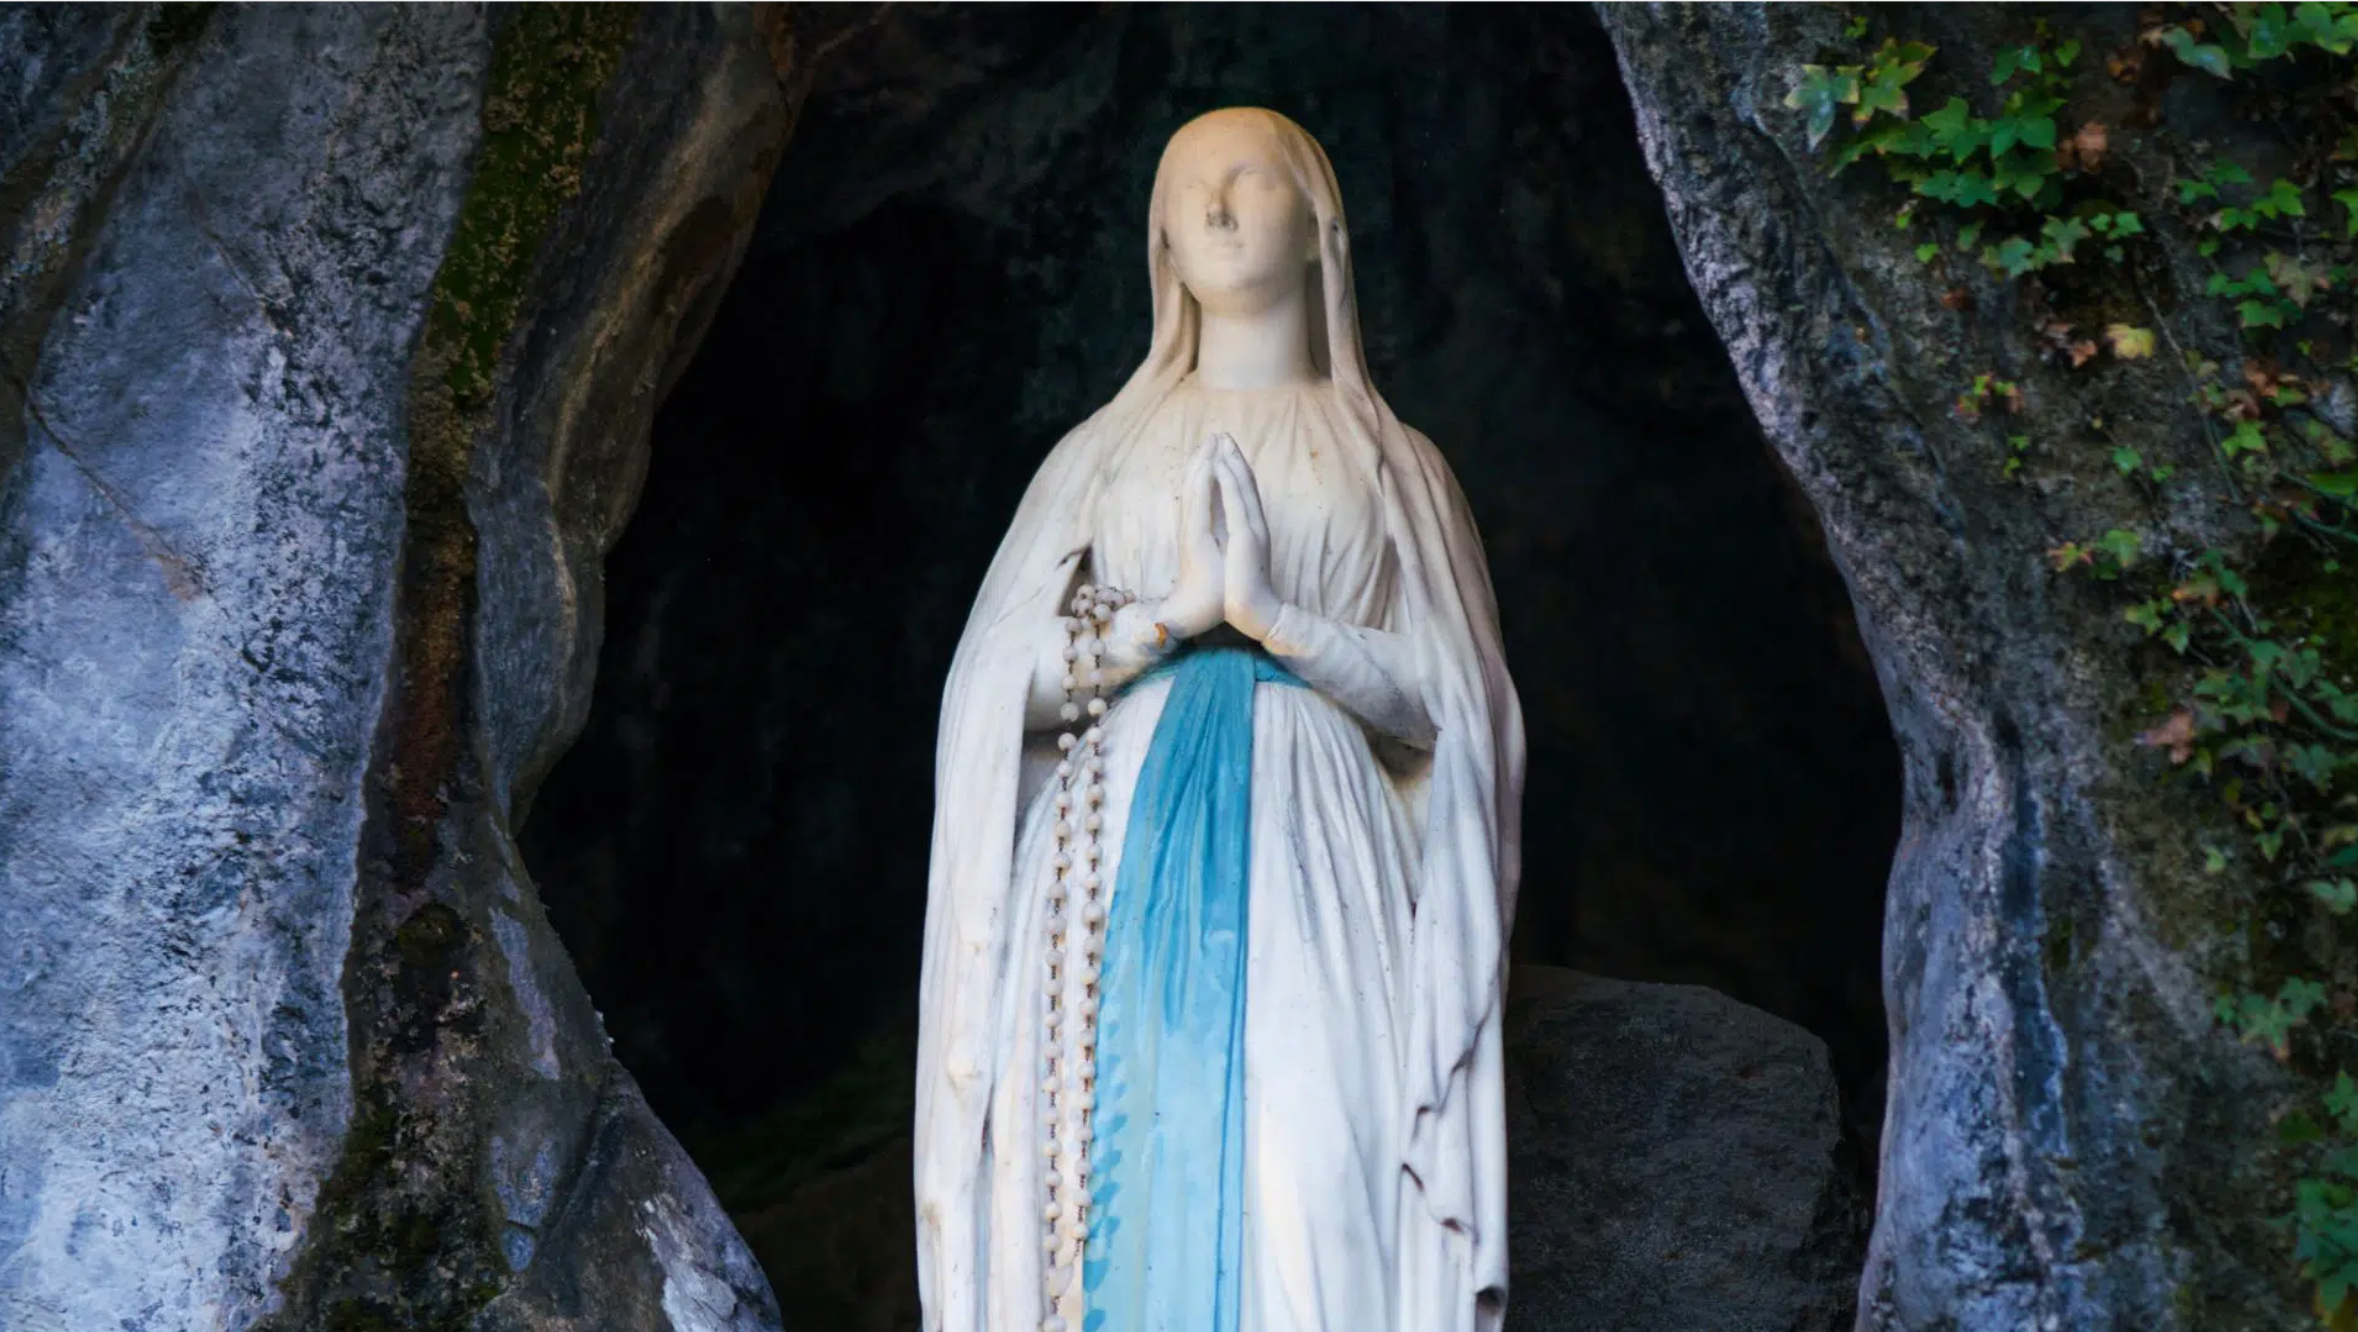 The Story of the Virgin of Lourdes